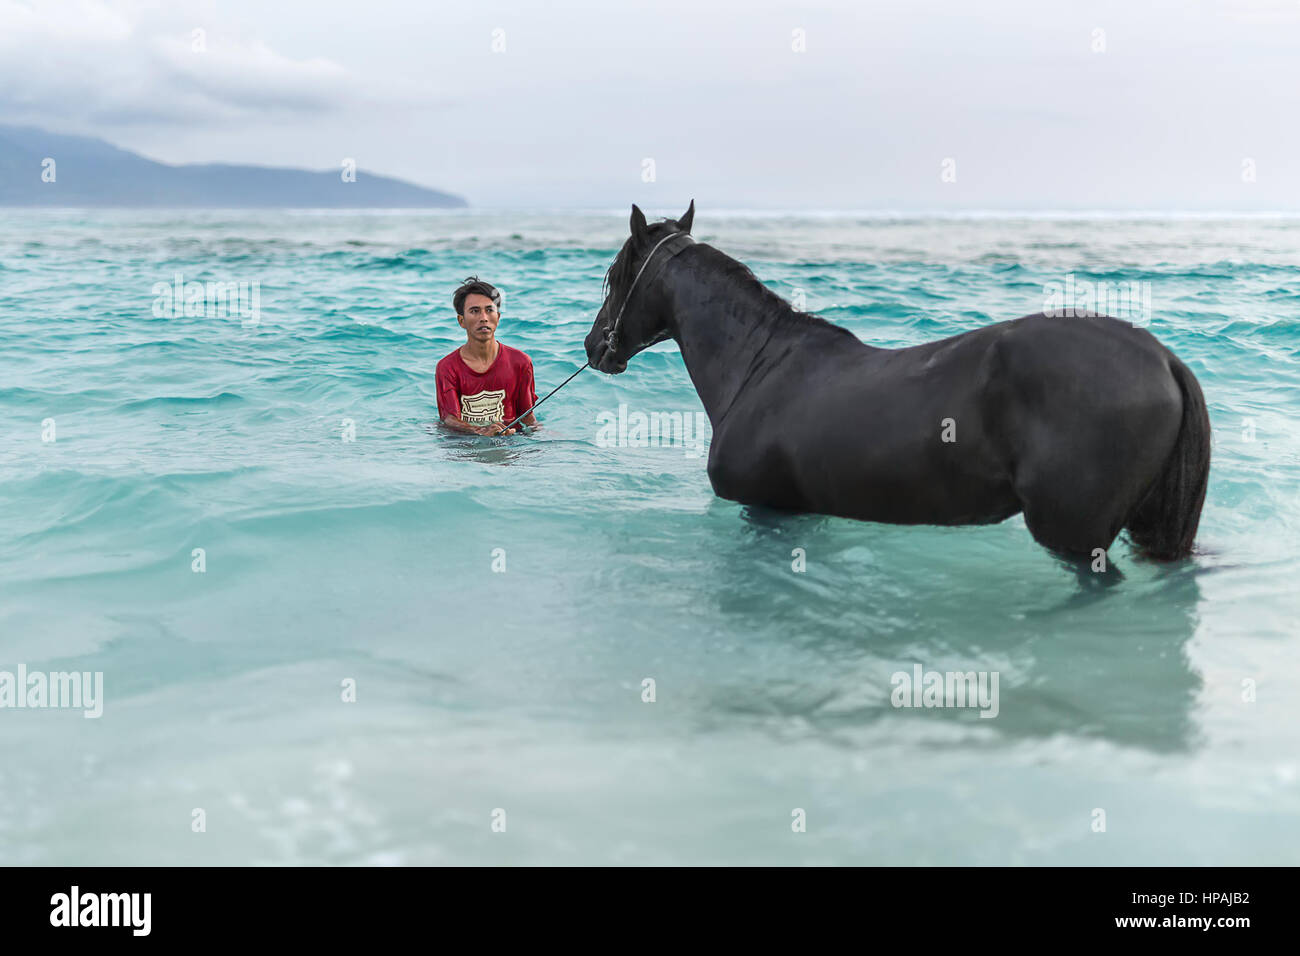 Gili Trawangan, Indonesia - 25 January 2017: man with horse in the sea on the background of the cloudy sky and mountains. Editorial photo. Horizontal. Stock Photo